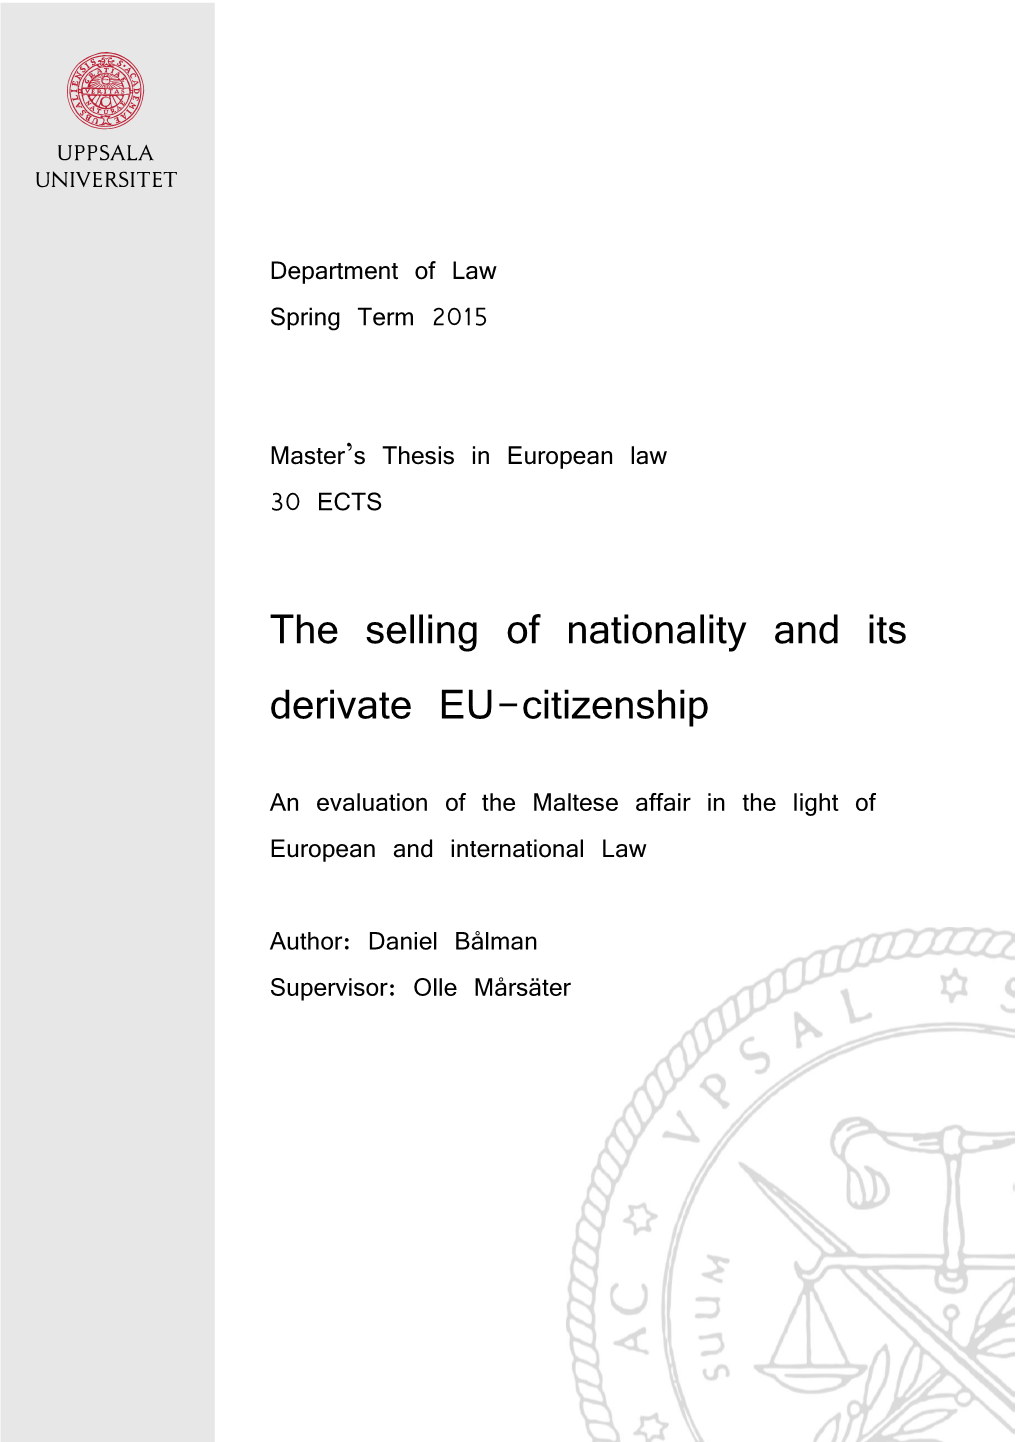 The Selling of Nationality and Its Derivate EU-Citizenship